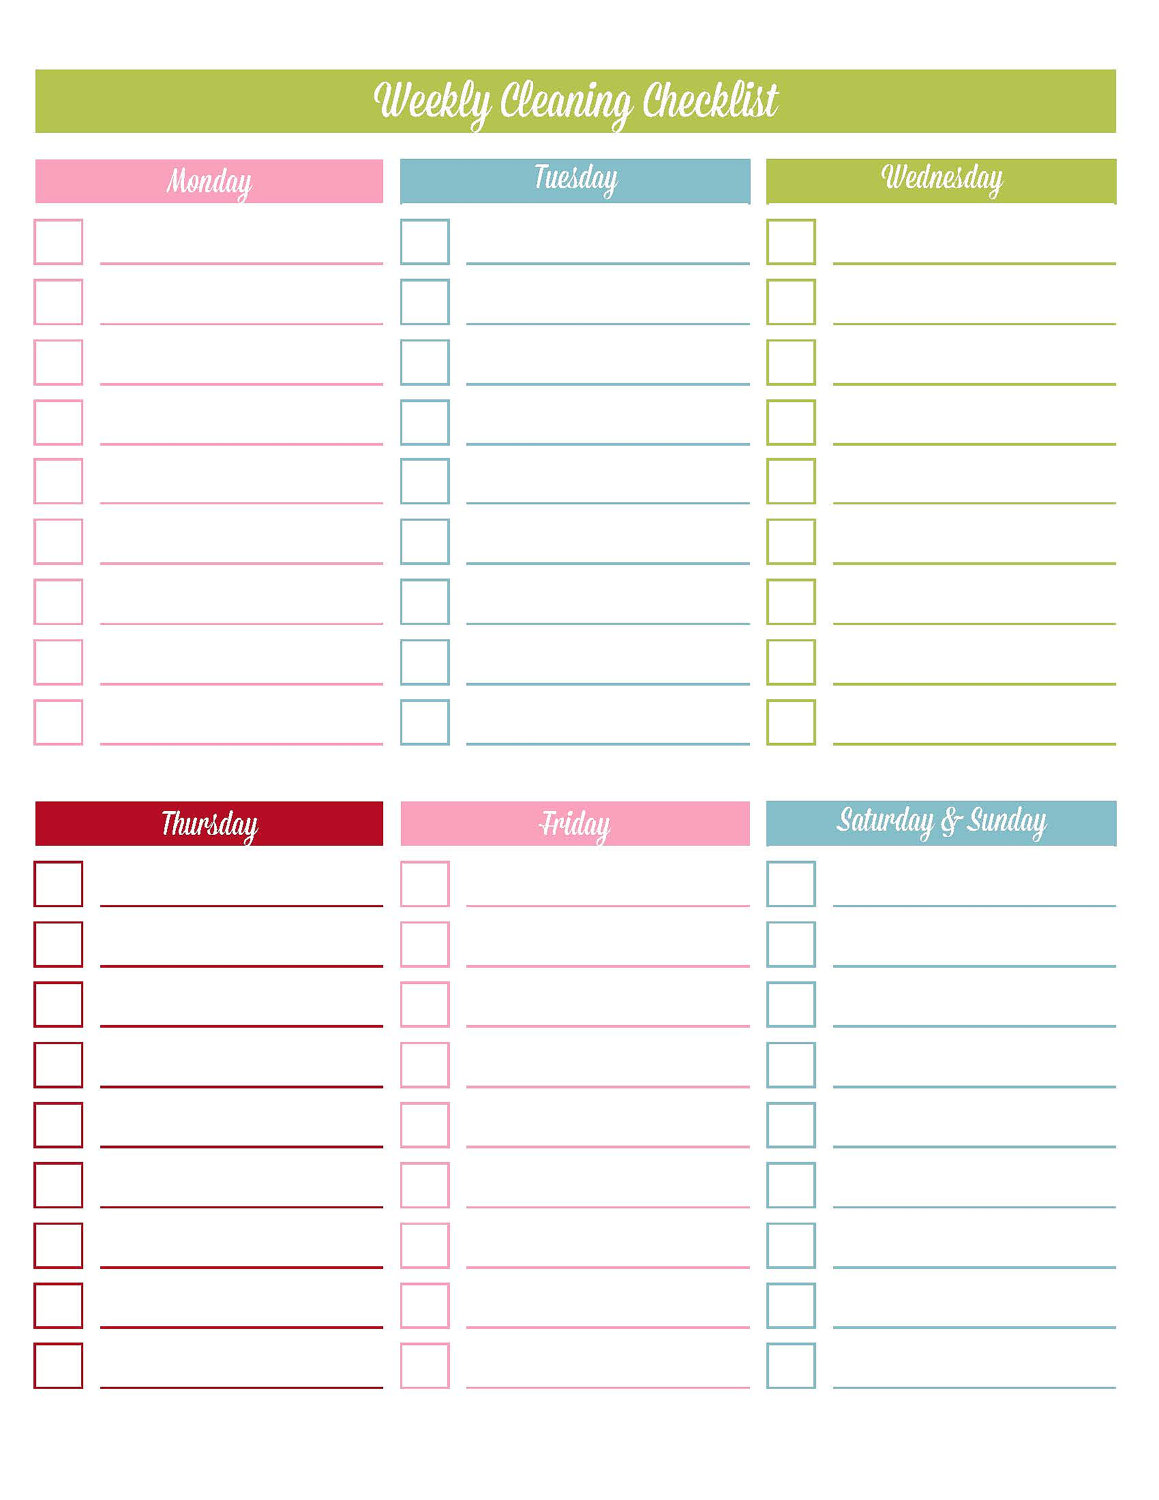 6-best-images-of-to-do-list-printable-editable-template-editable-to-do-list-template-printable